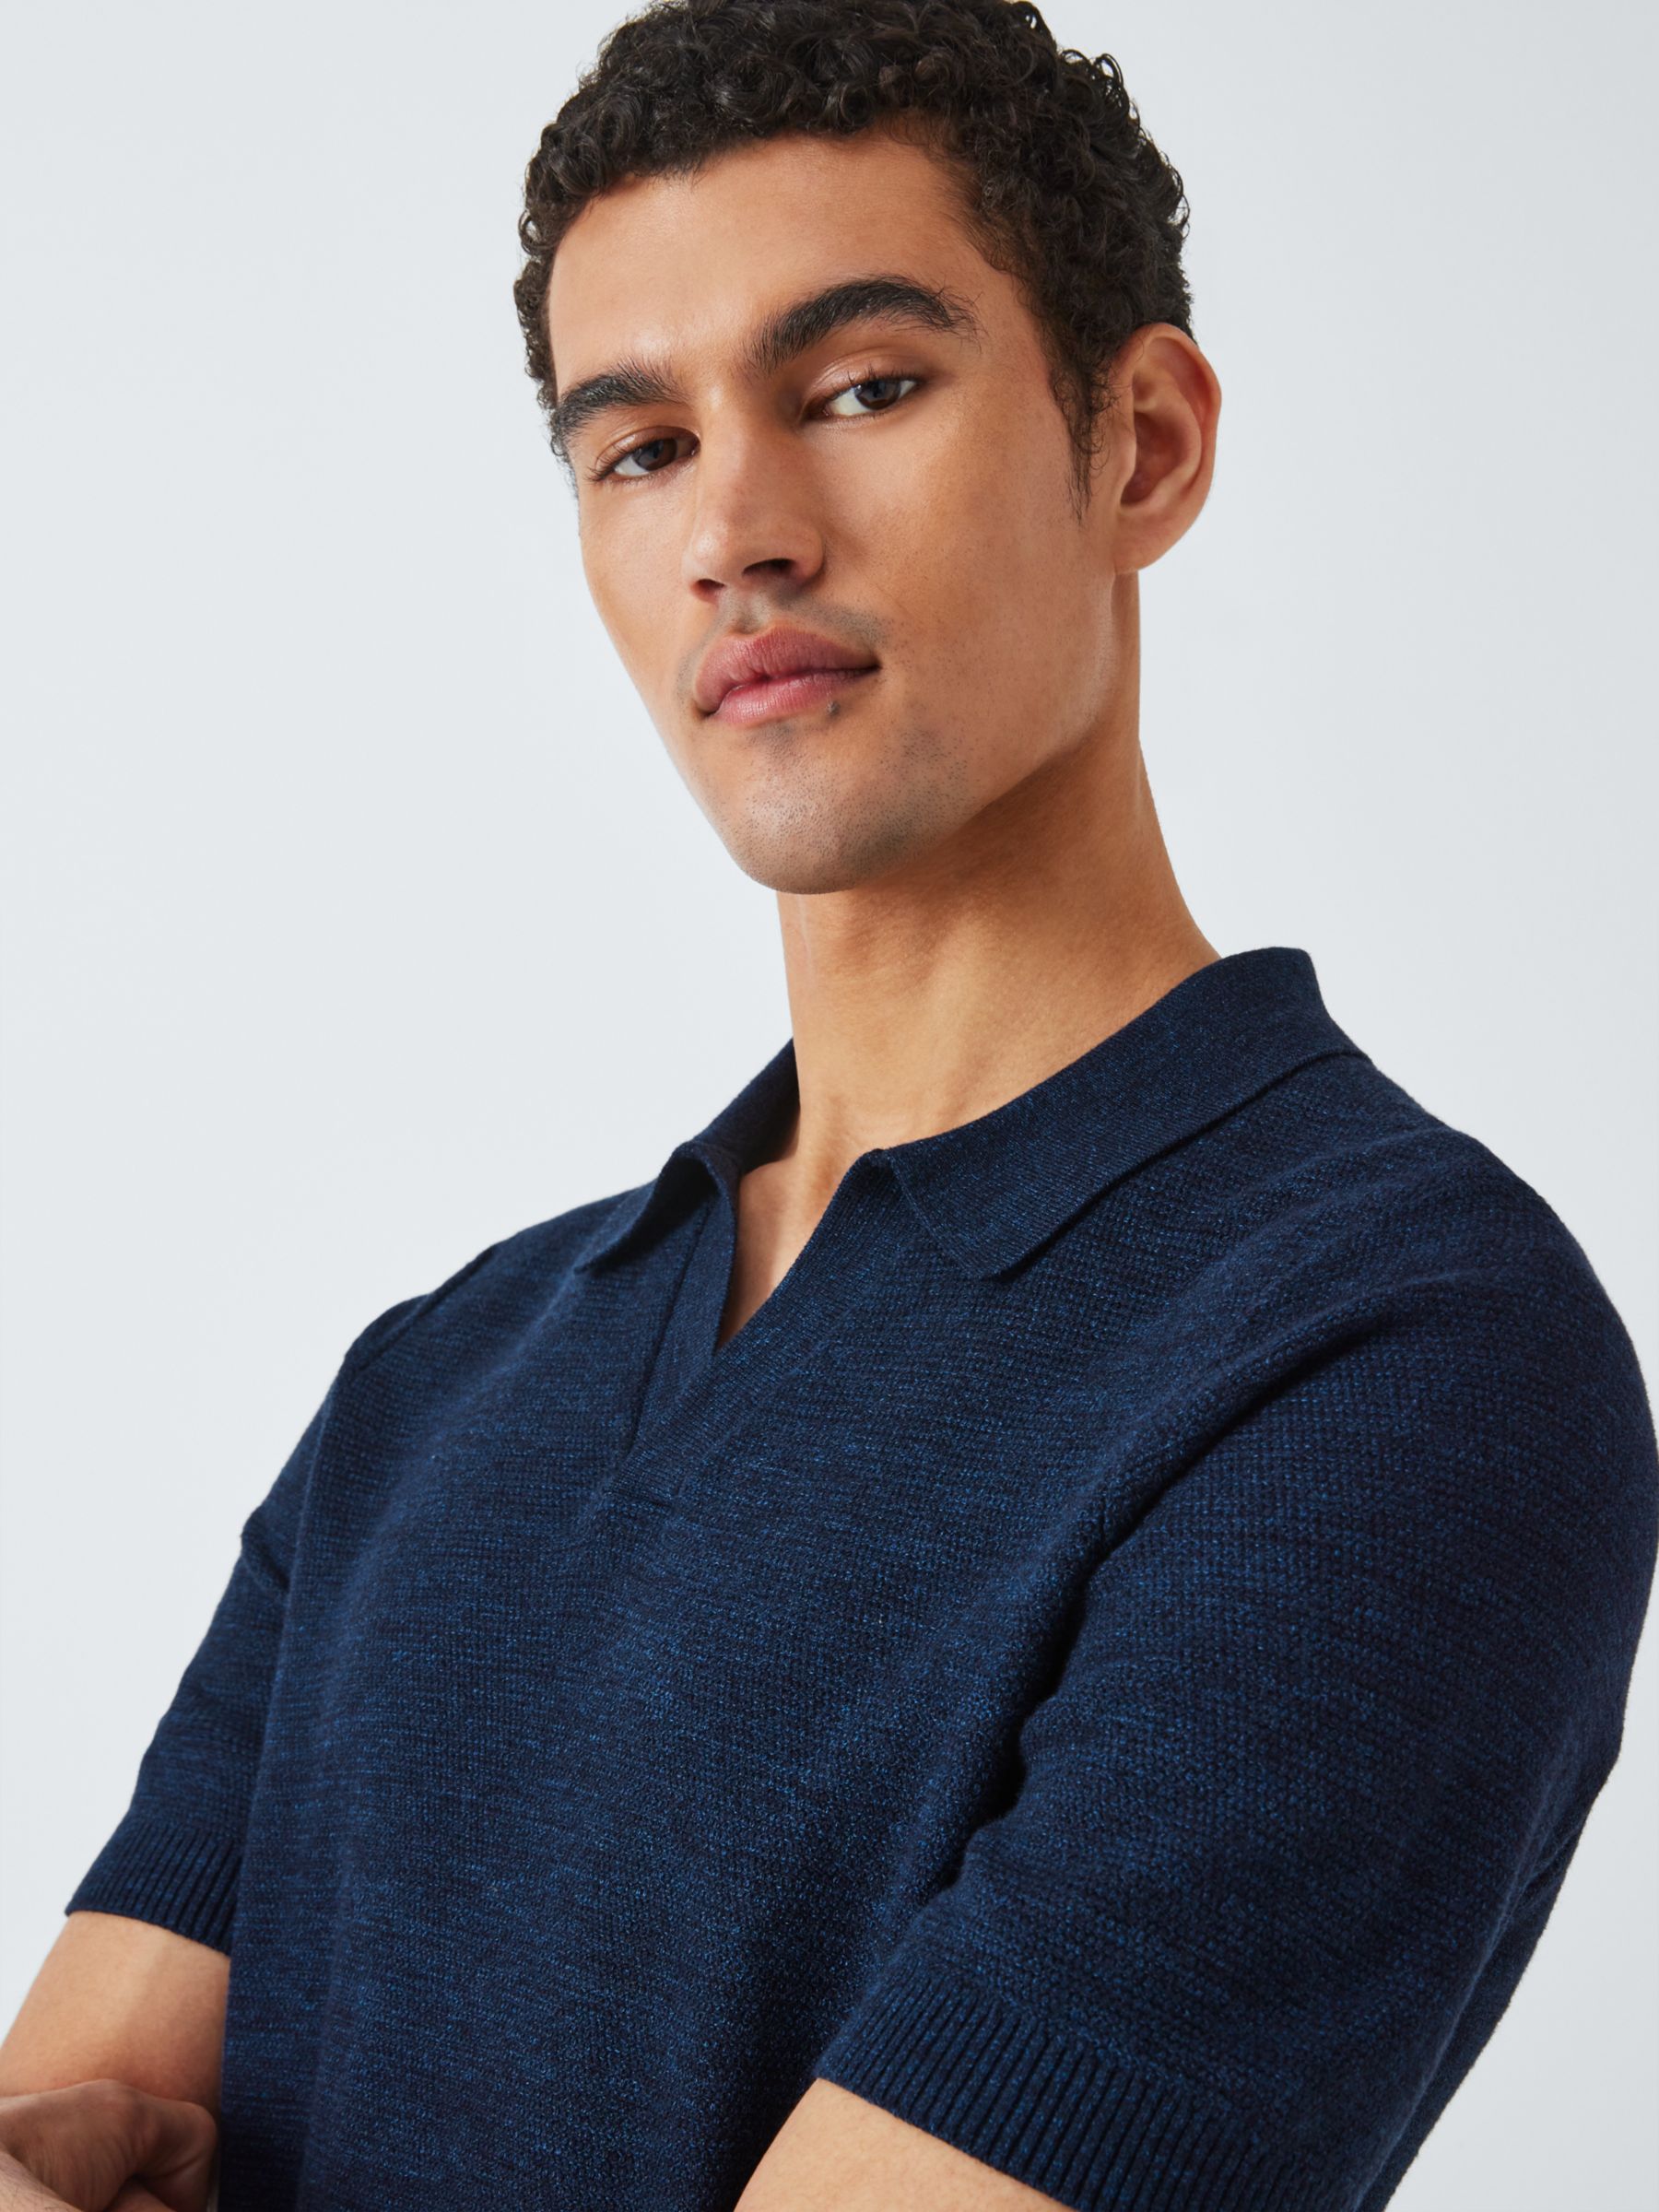 Buy John Lewis Short Sleeve Cotton Textured Knit Polo Online at johnlewis.com